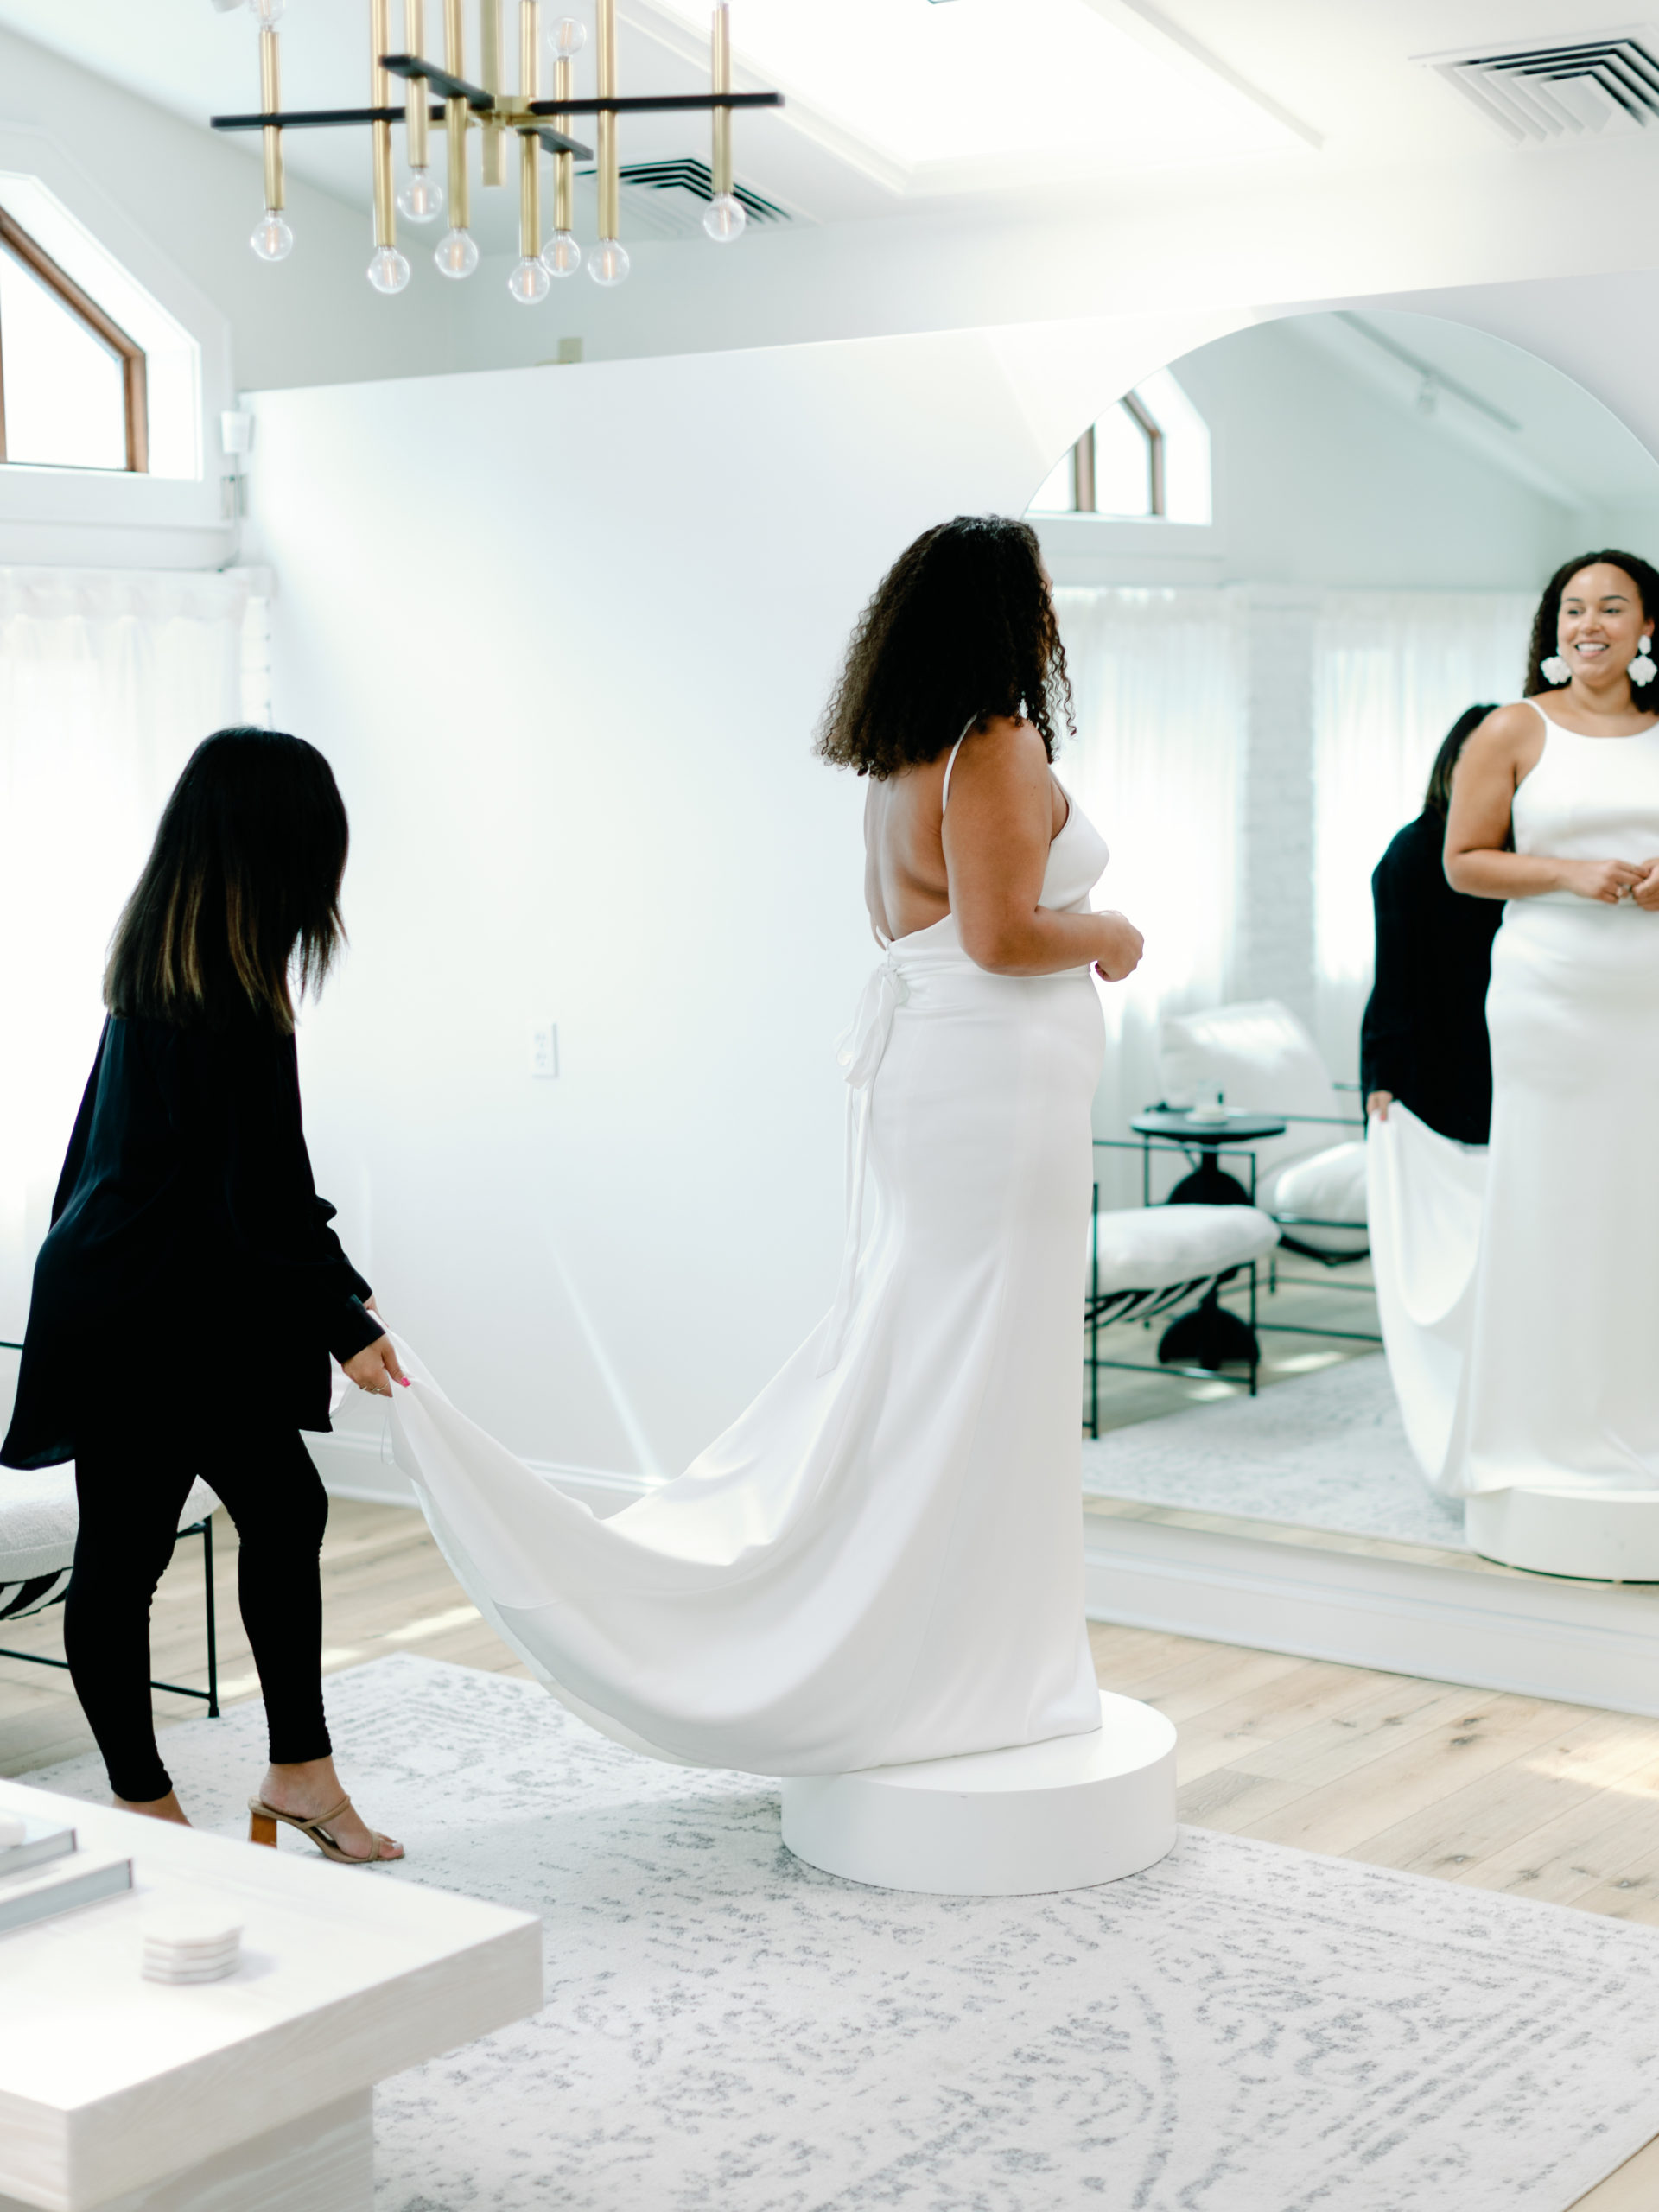 Bride trying on wedding dress at bridal shop | McArthur Weddings and Events